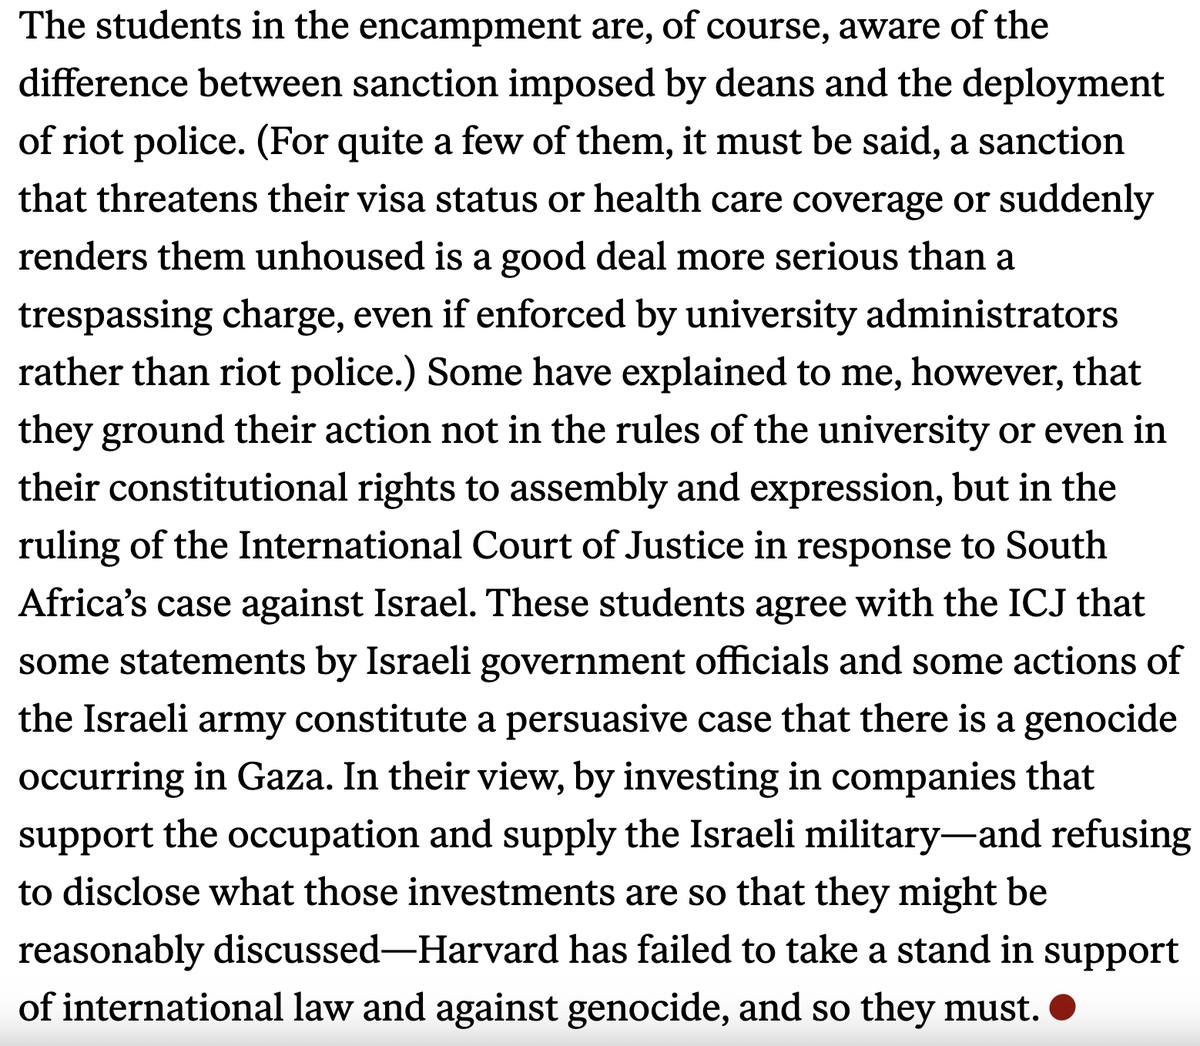 'Some [students] have explained to me... that they ground their action not in the rules of the university or even in their constitutional rights to assembly and expression, but in the ruling of the International Court of Justice in response to South Africa’s case against Israel.'